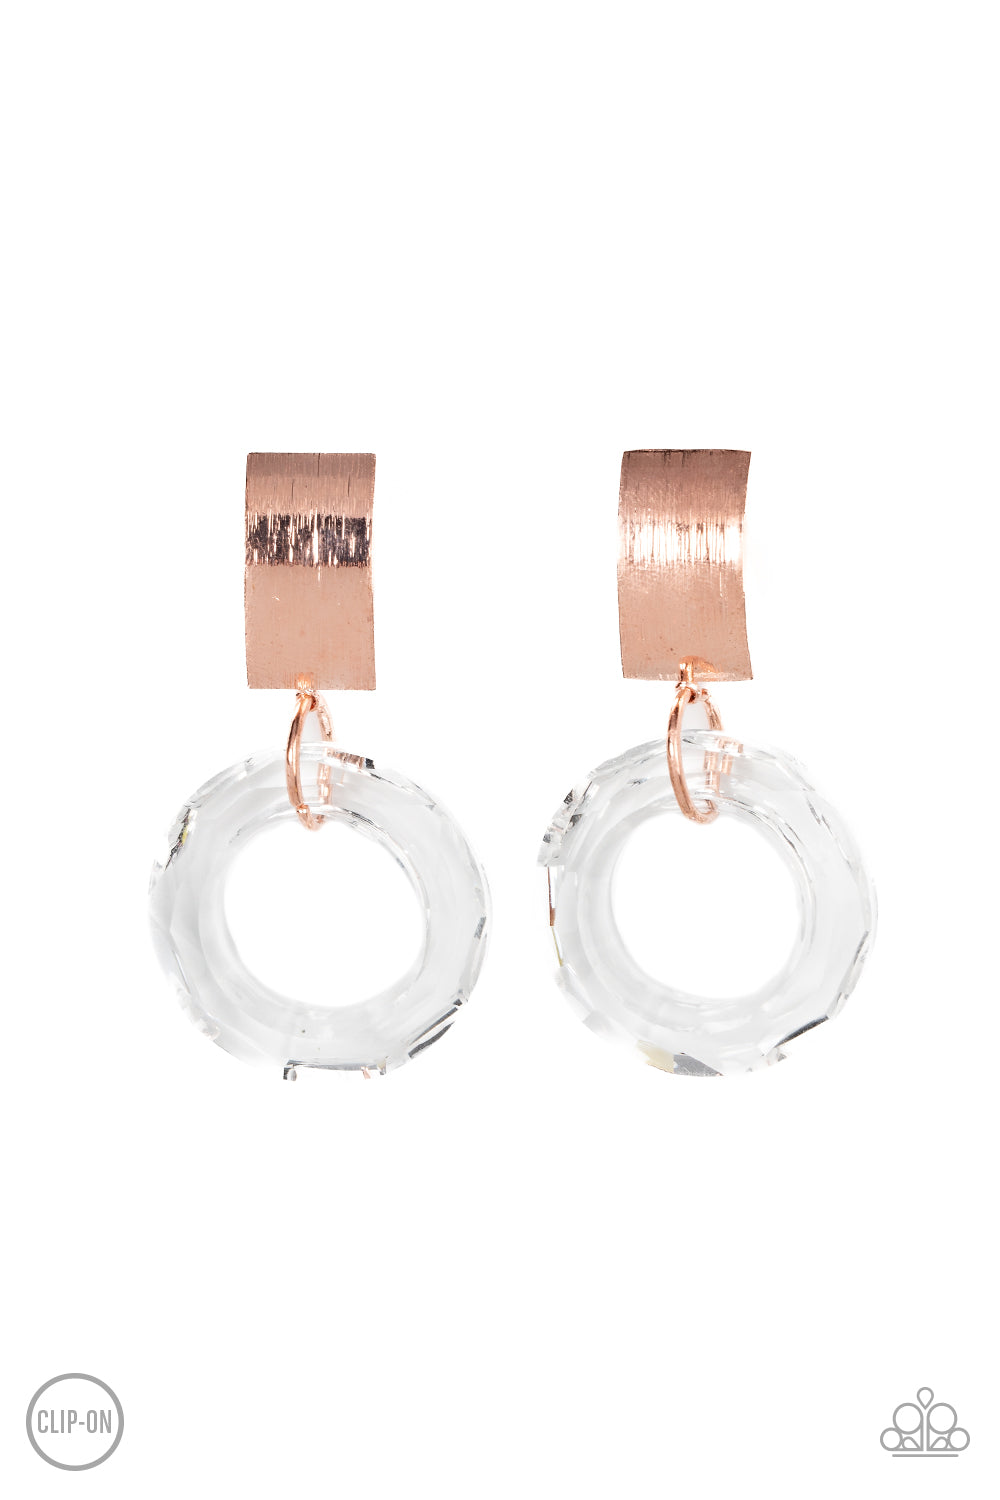 Paparazzi - Clear Out! - Copper Earrings